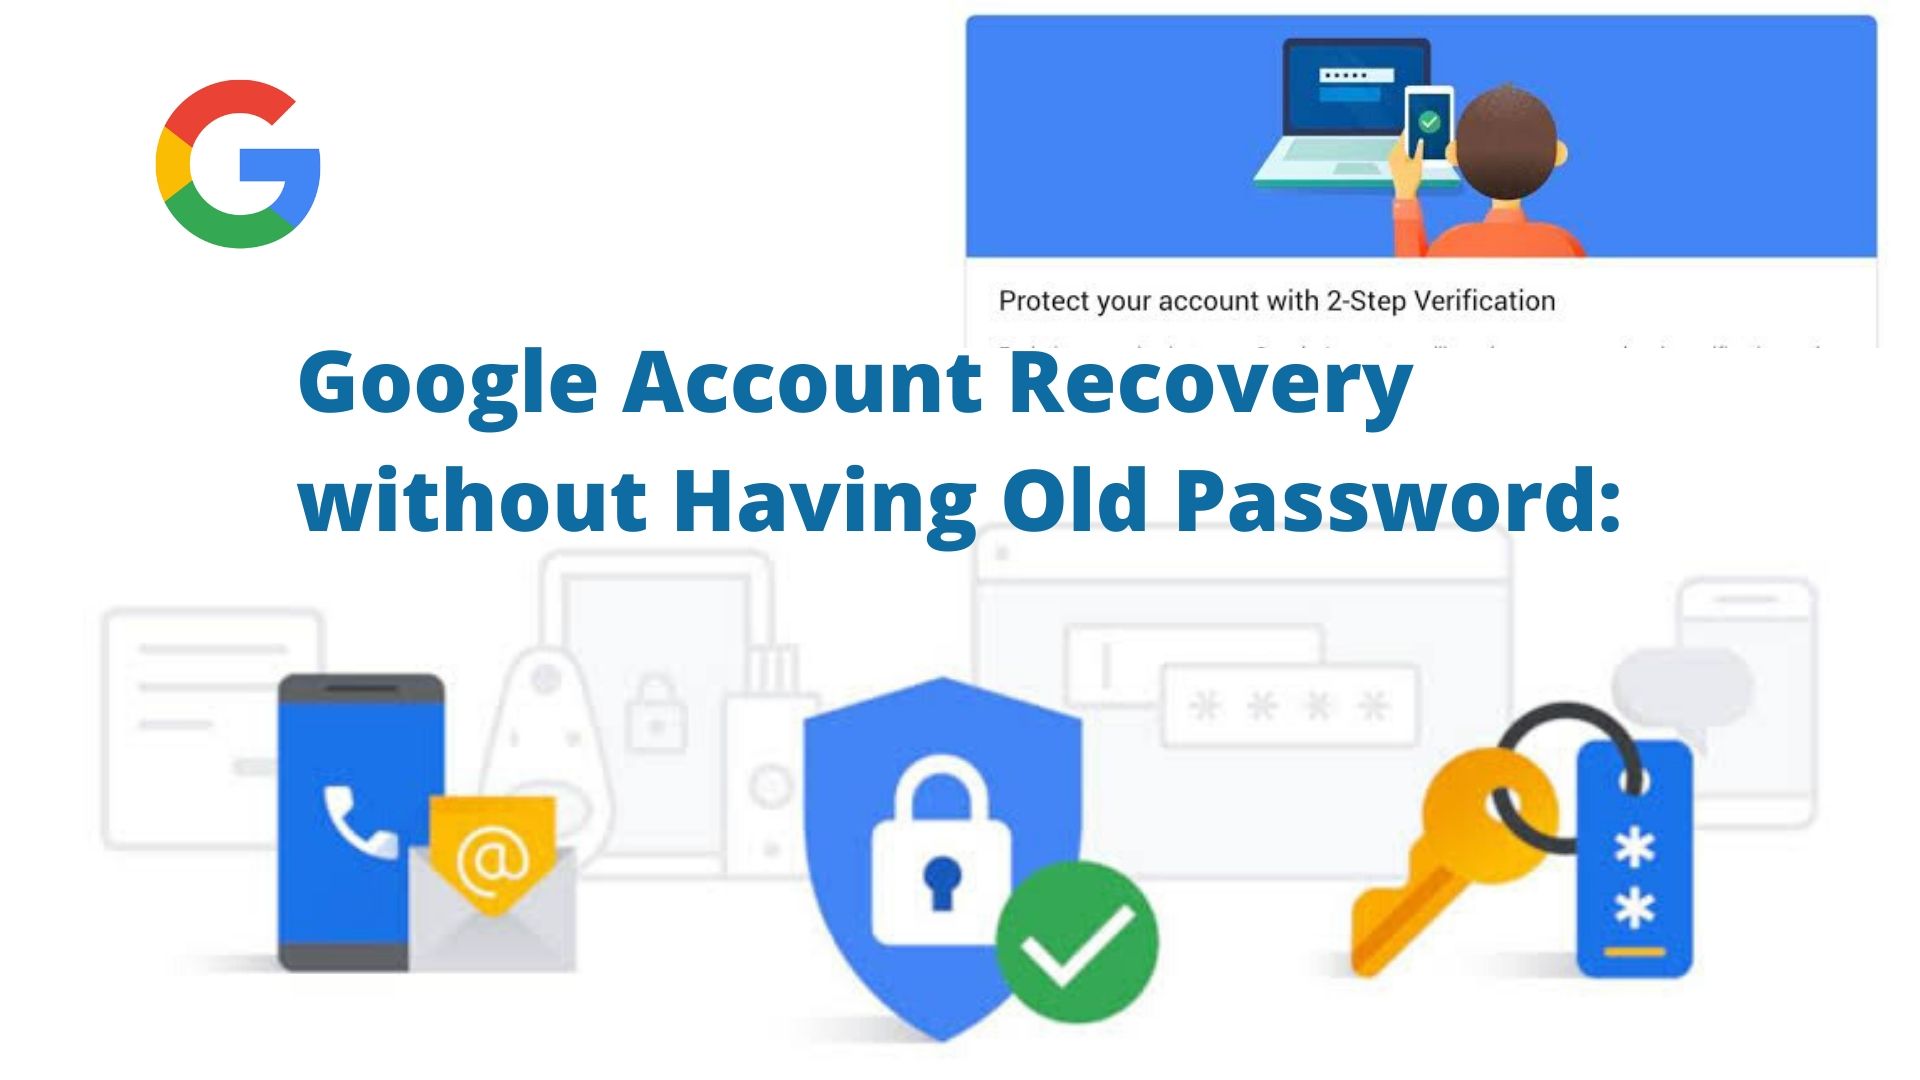 How to add recovery phone number in google account?